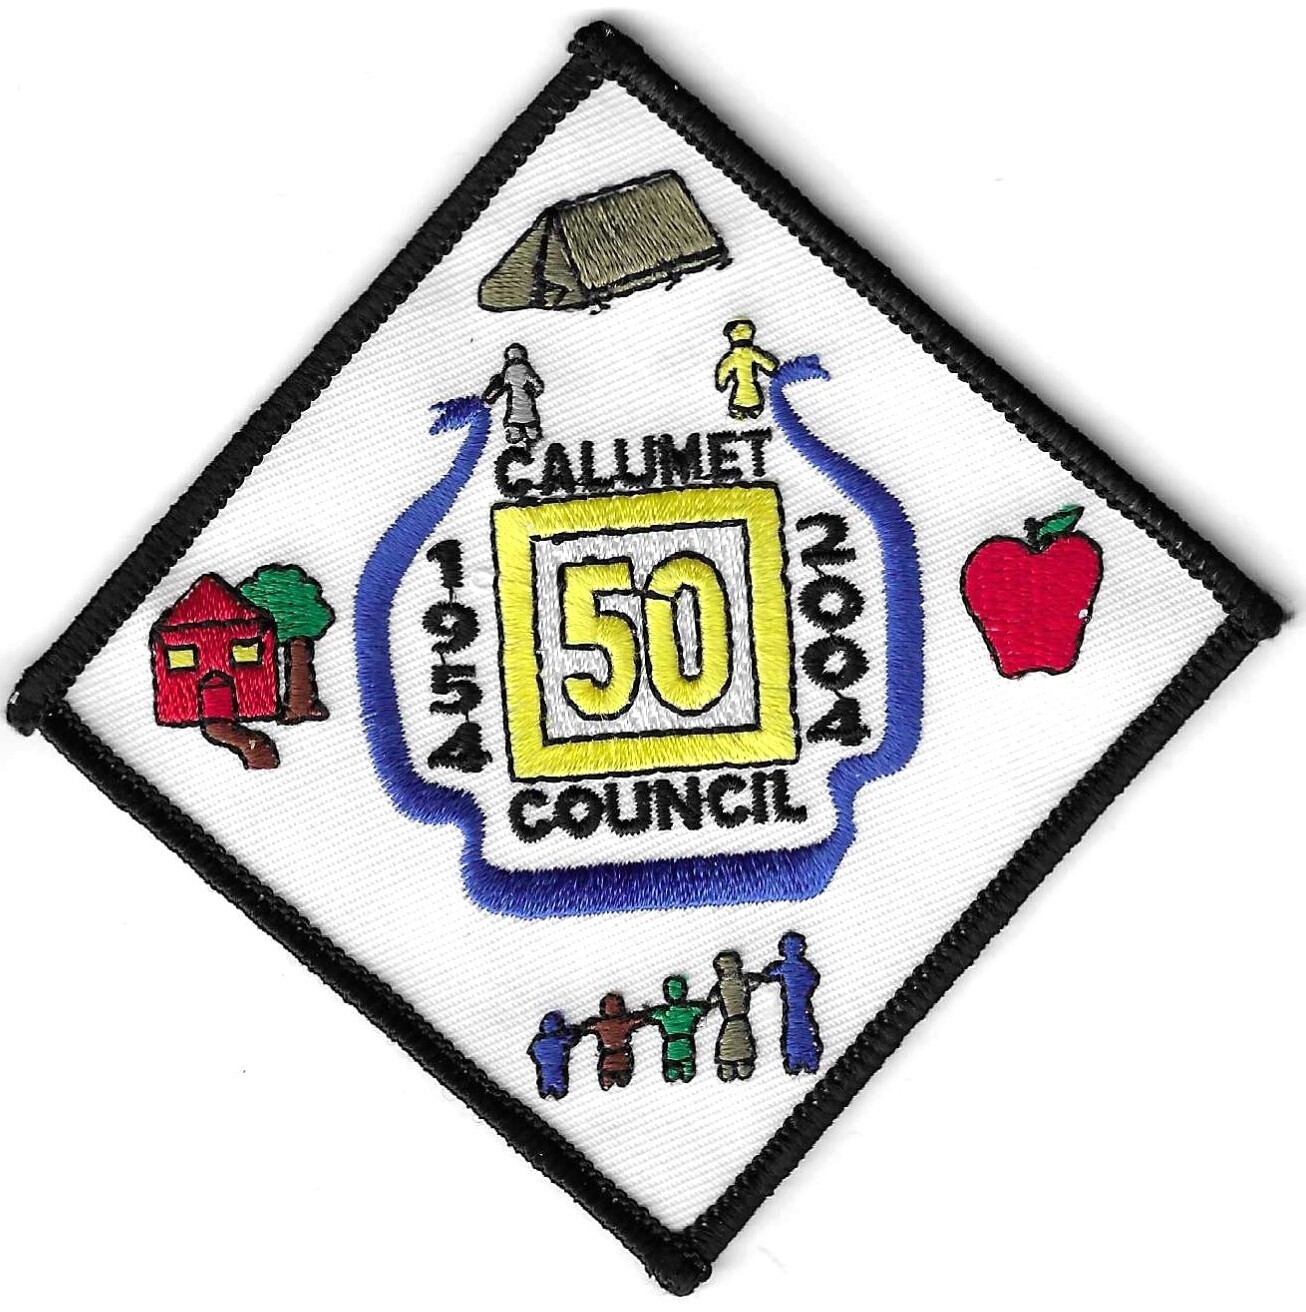 Calumet Council 50th anniversary council patch (Indiana)